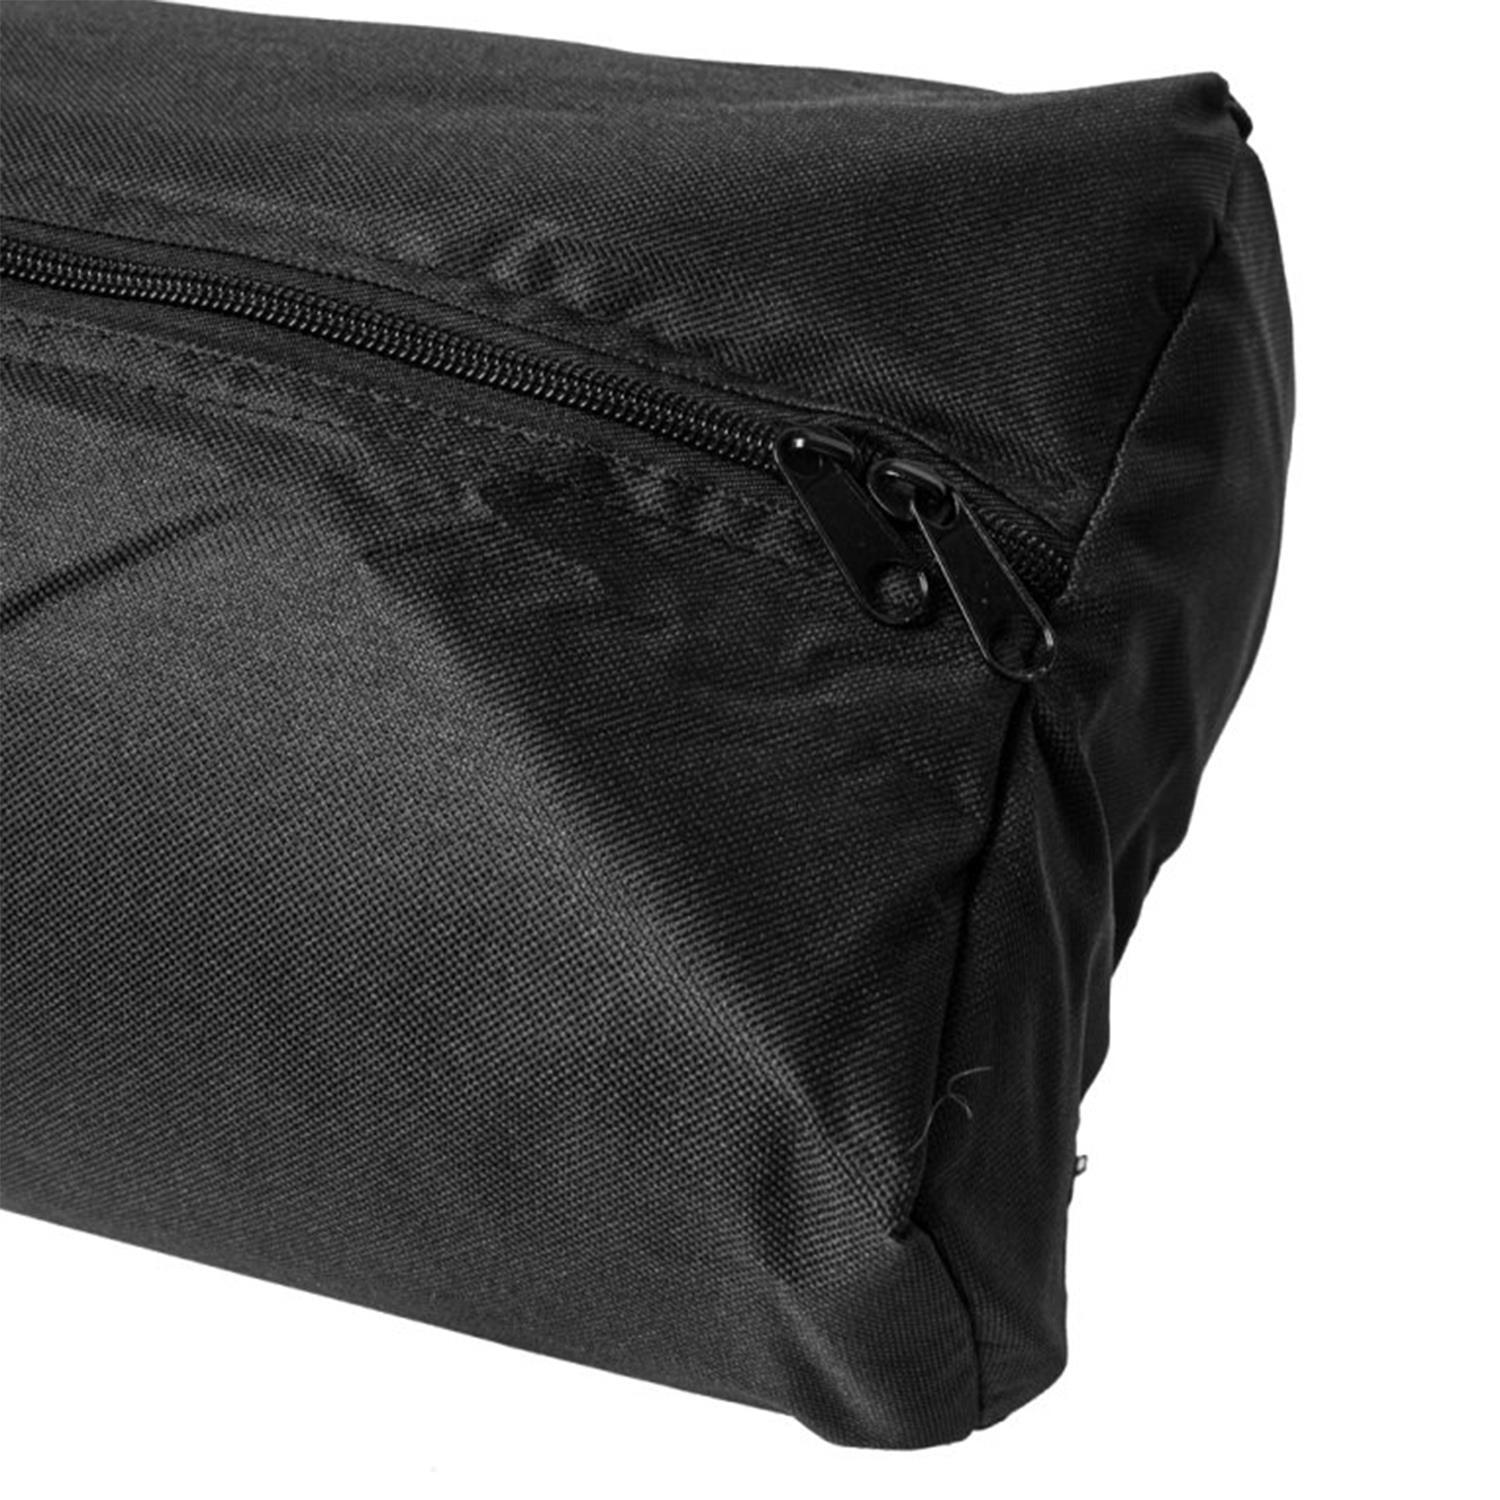 Stagg SPKB 6 Padded Bag for 2 Speaker Stands / Microphone Stands - DY Pro Audio